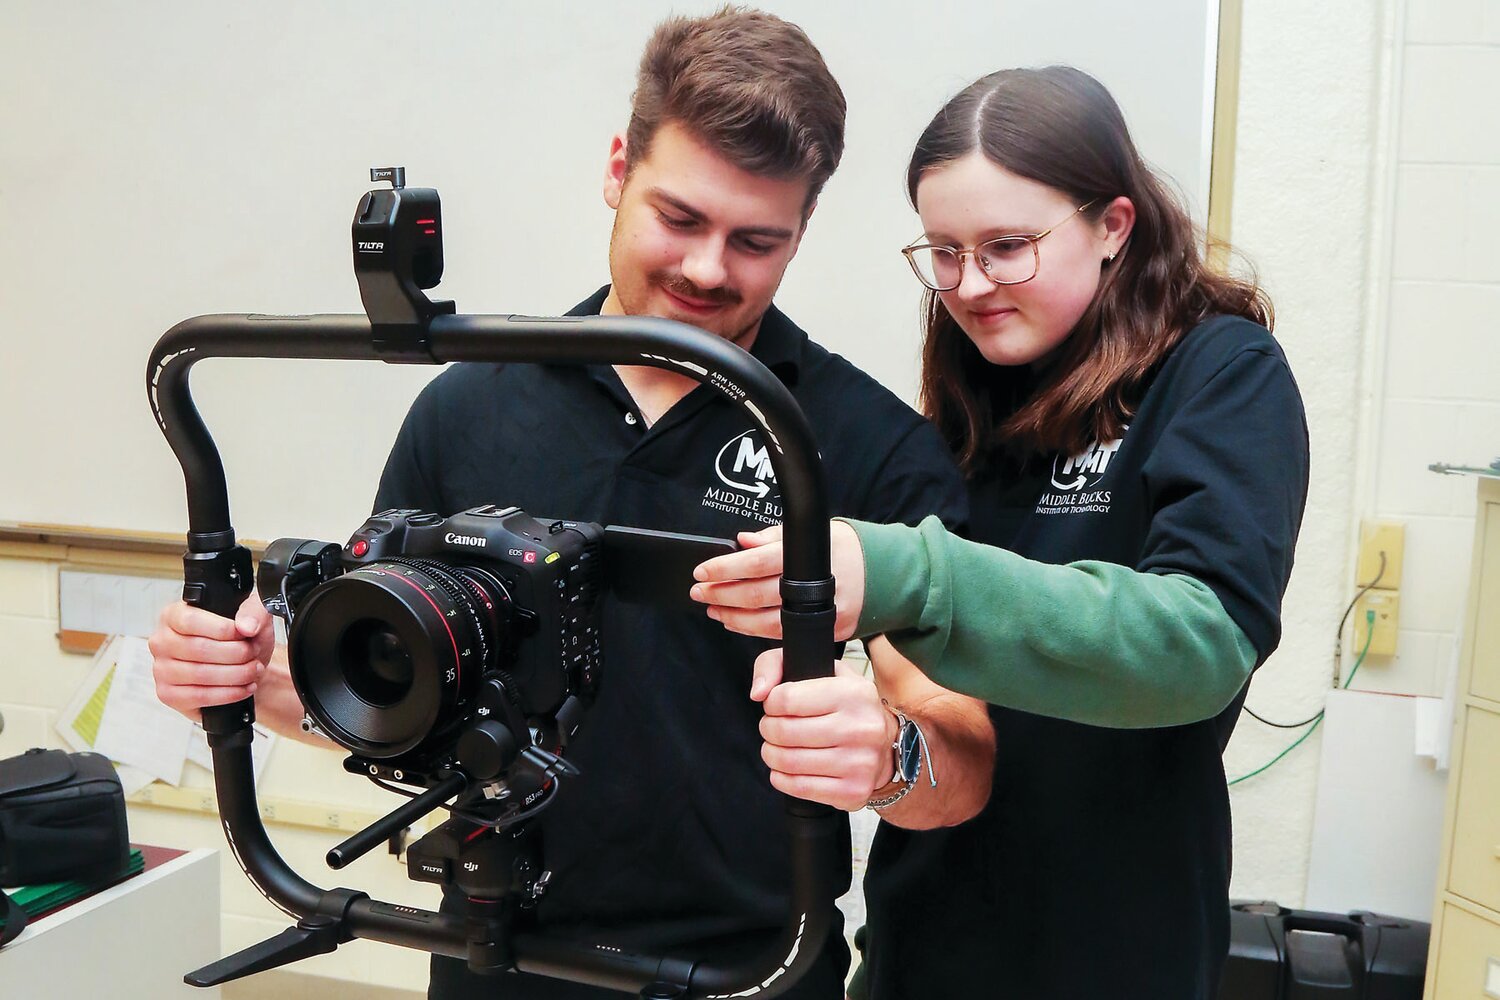 Middle Bucks Institute of Technology Multimedia Technology students Christian Pearson and Samantha Rosinski participated as a team in SkillsUSA Digital Cinema Production competitions, placing second at the national level.